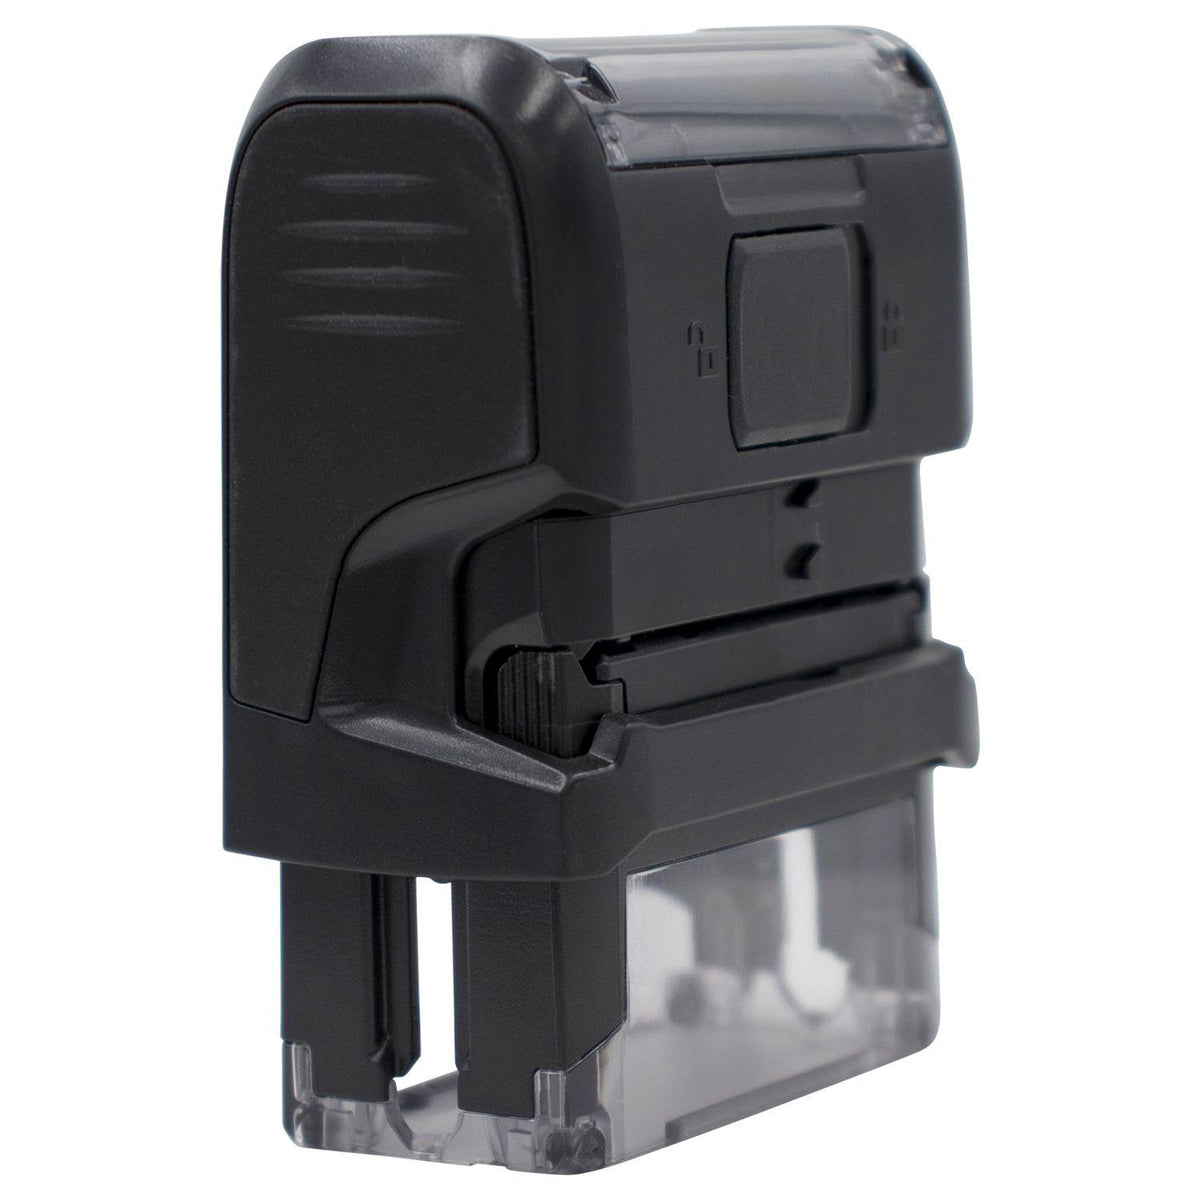 Self-Inking Global Air Letter Post Stamp - Engineer Seal Stamps - Brand_Trodat, Impression Size_Small, Stamp Type_Self-Inking Stamp, Type of Use_Business, Type of Use_Postal &amp; Mailing